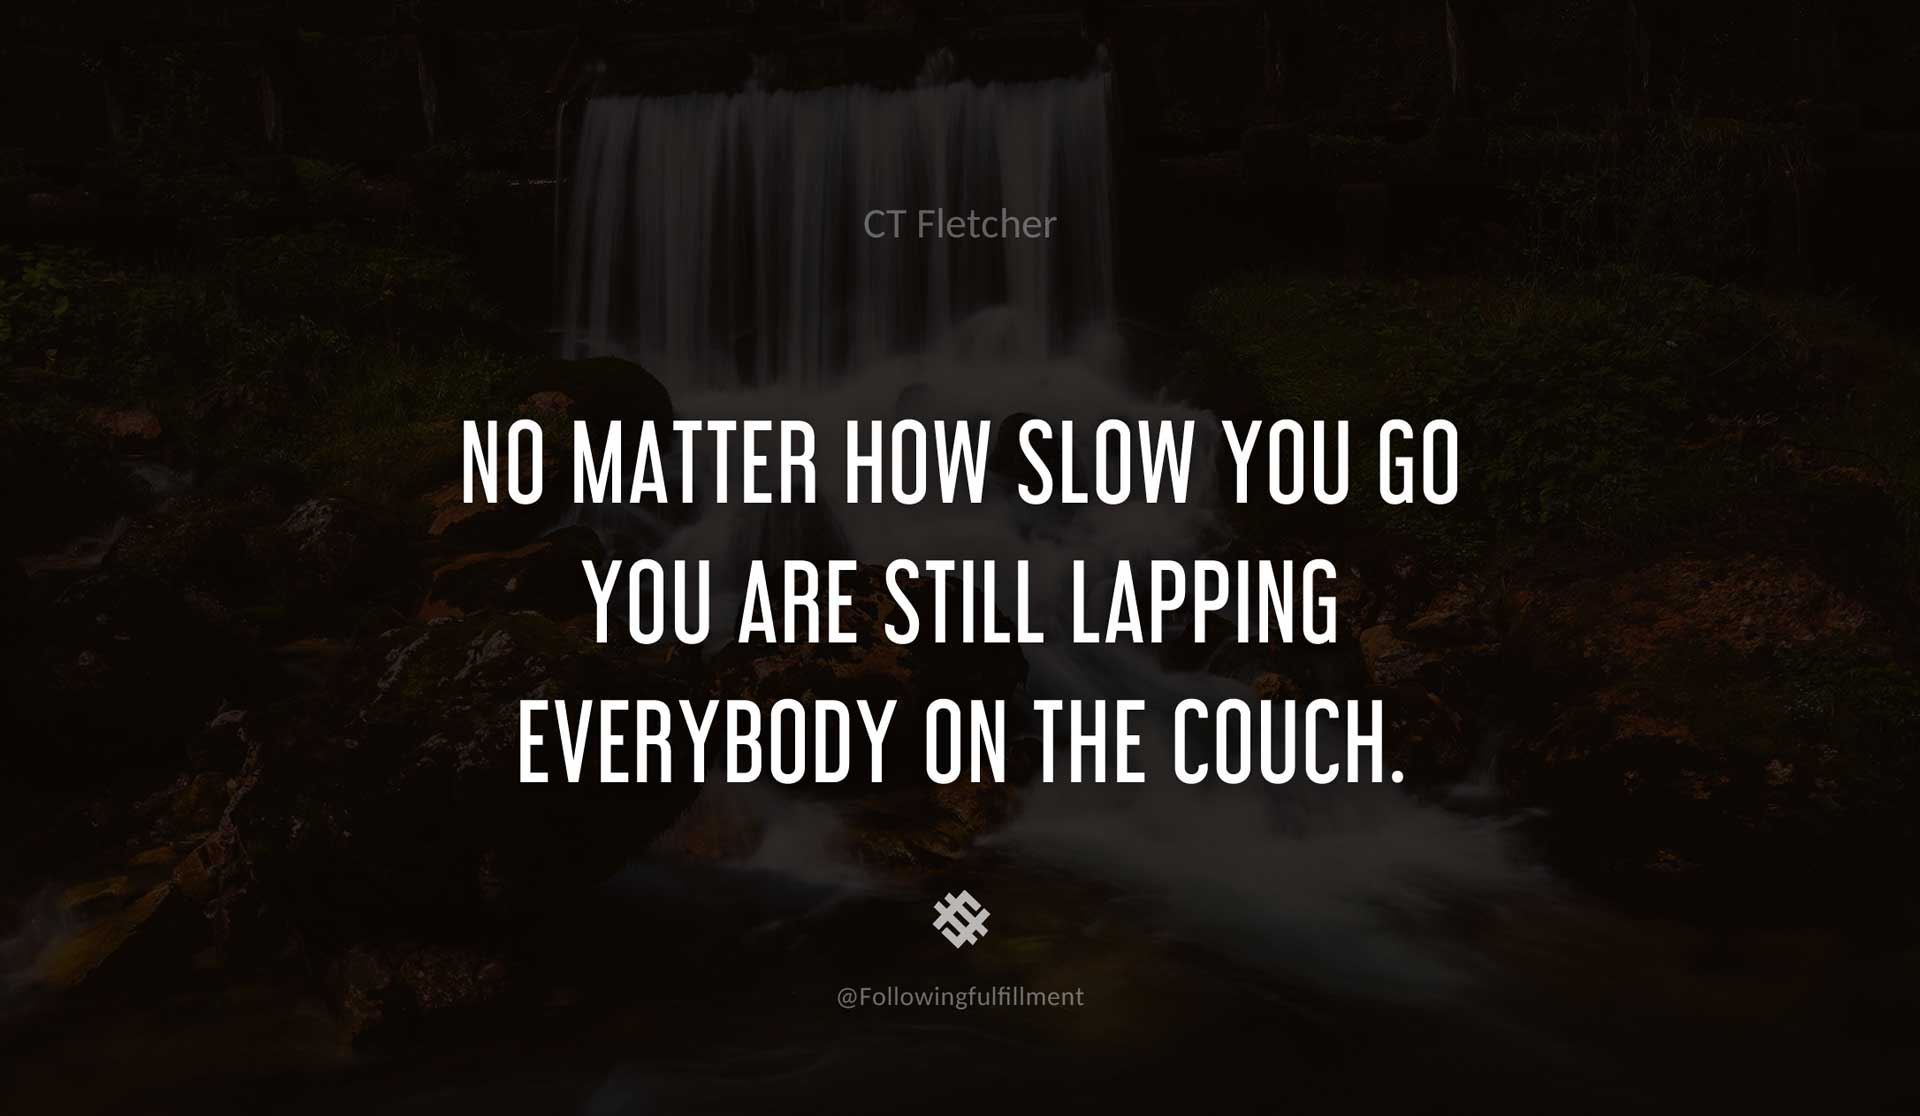 No-matter-how-slow-you-go-you-are-still-lapping-everybody-on-the-couch.-CT-FLETCHER-Quote.jpg